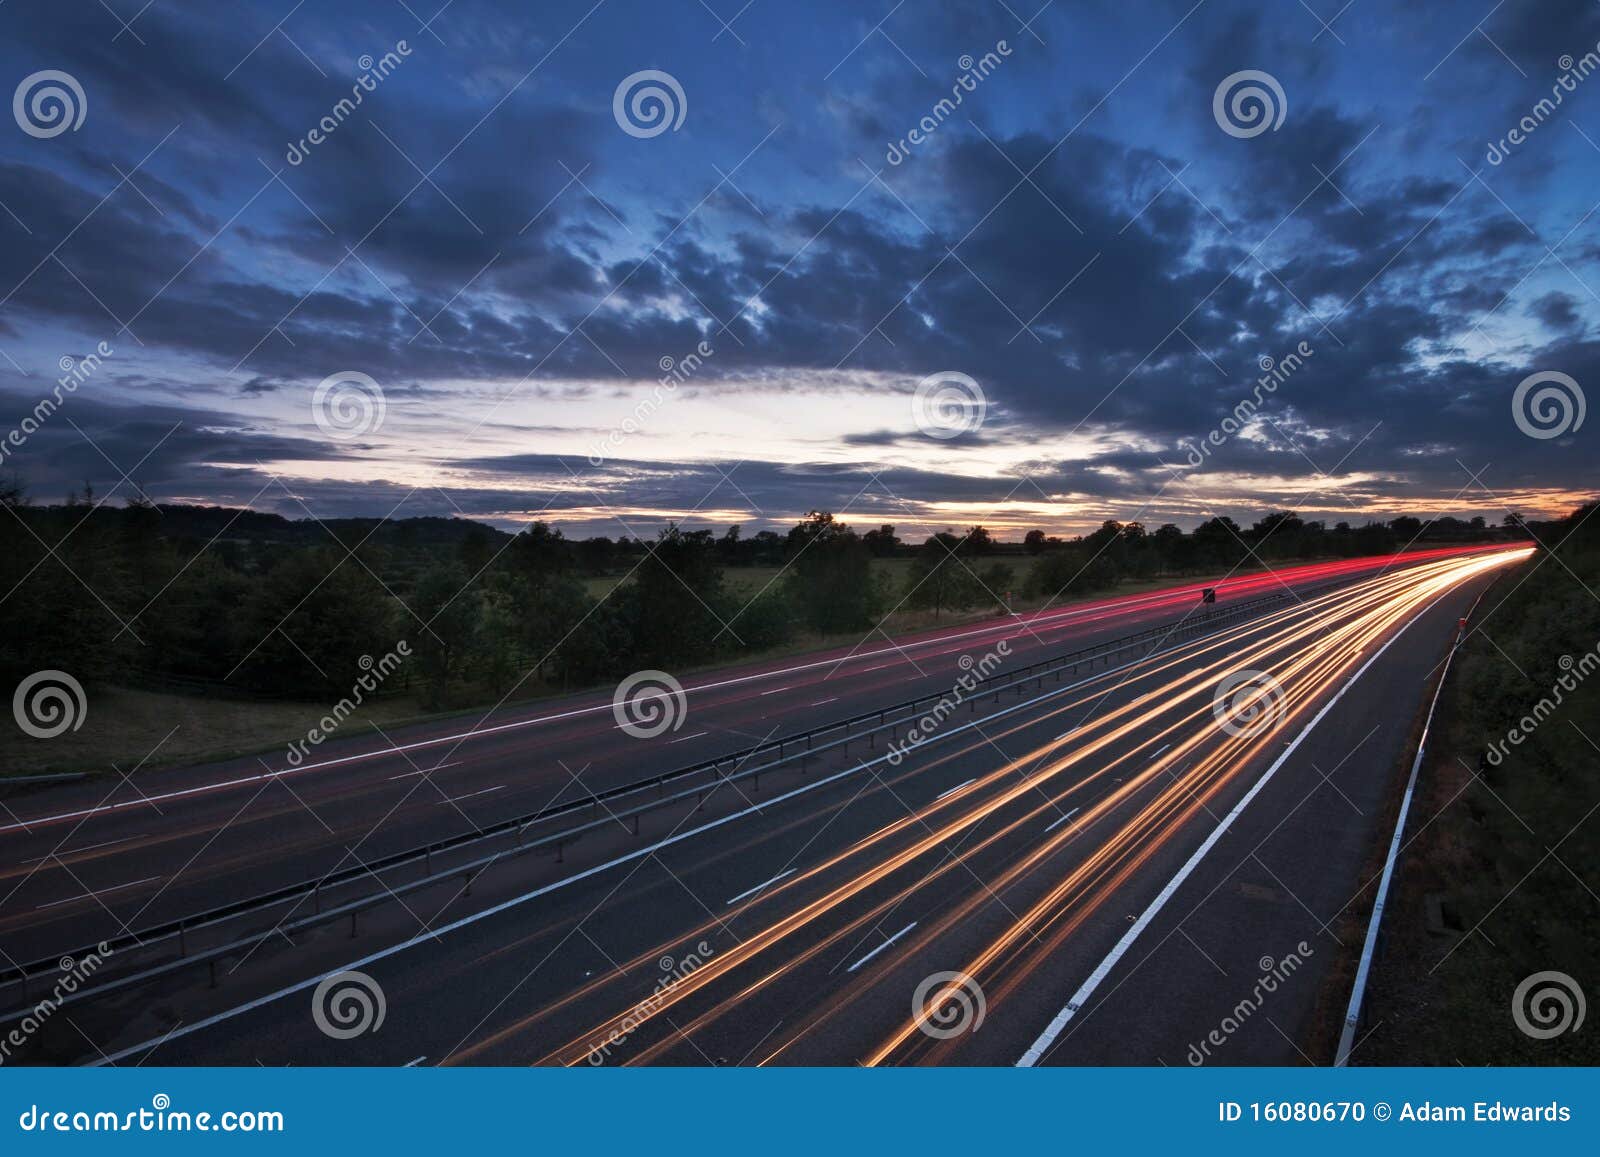 light trails on a motorway at dusk